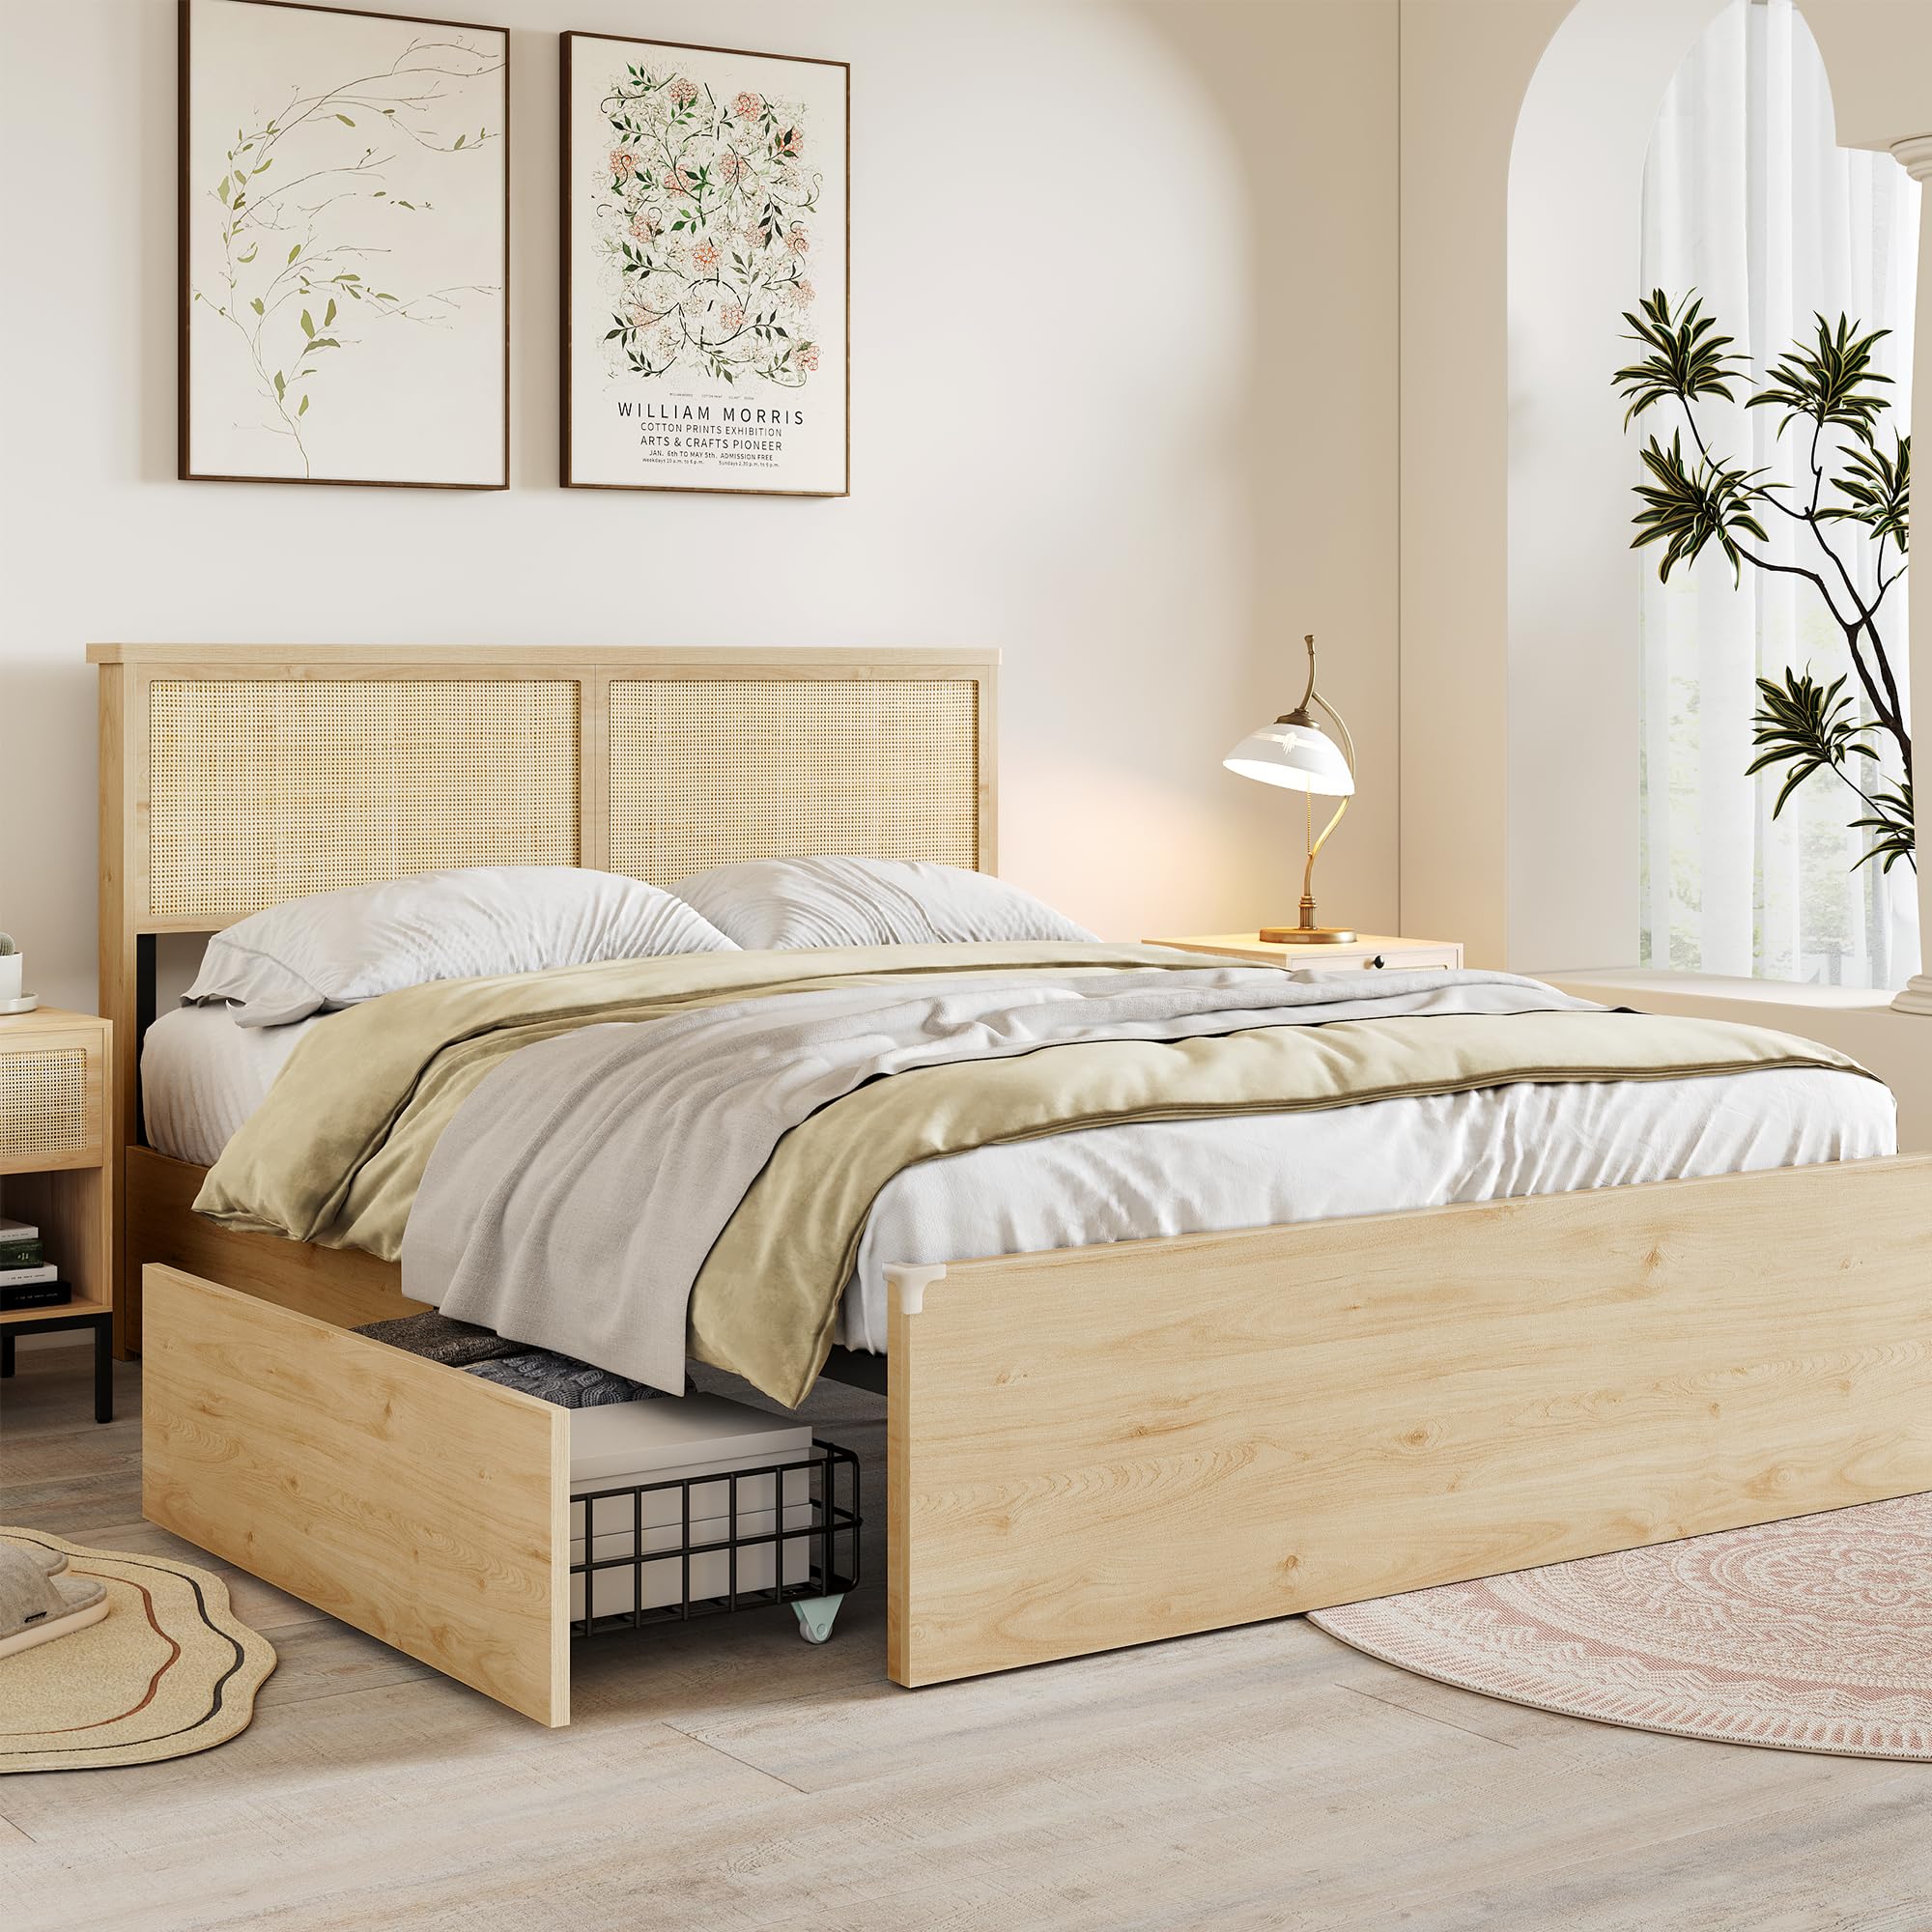 Natural Rattan Headboard Queen Bedframe with 4 Storage Drawers and Footboard, Boho Wooden Platform Bed with Sturdy Steel Frame and Strong Wooden Slats, No Box Spring Needed/Noise-Free/LED Light